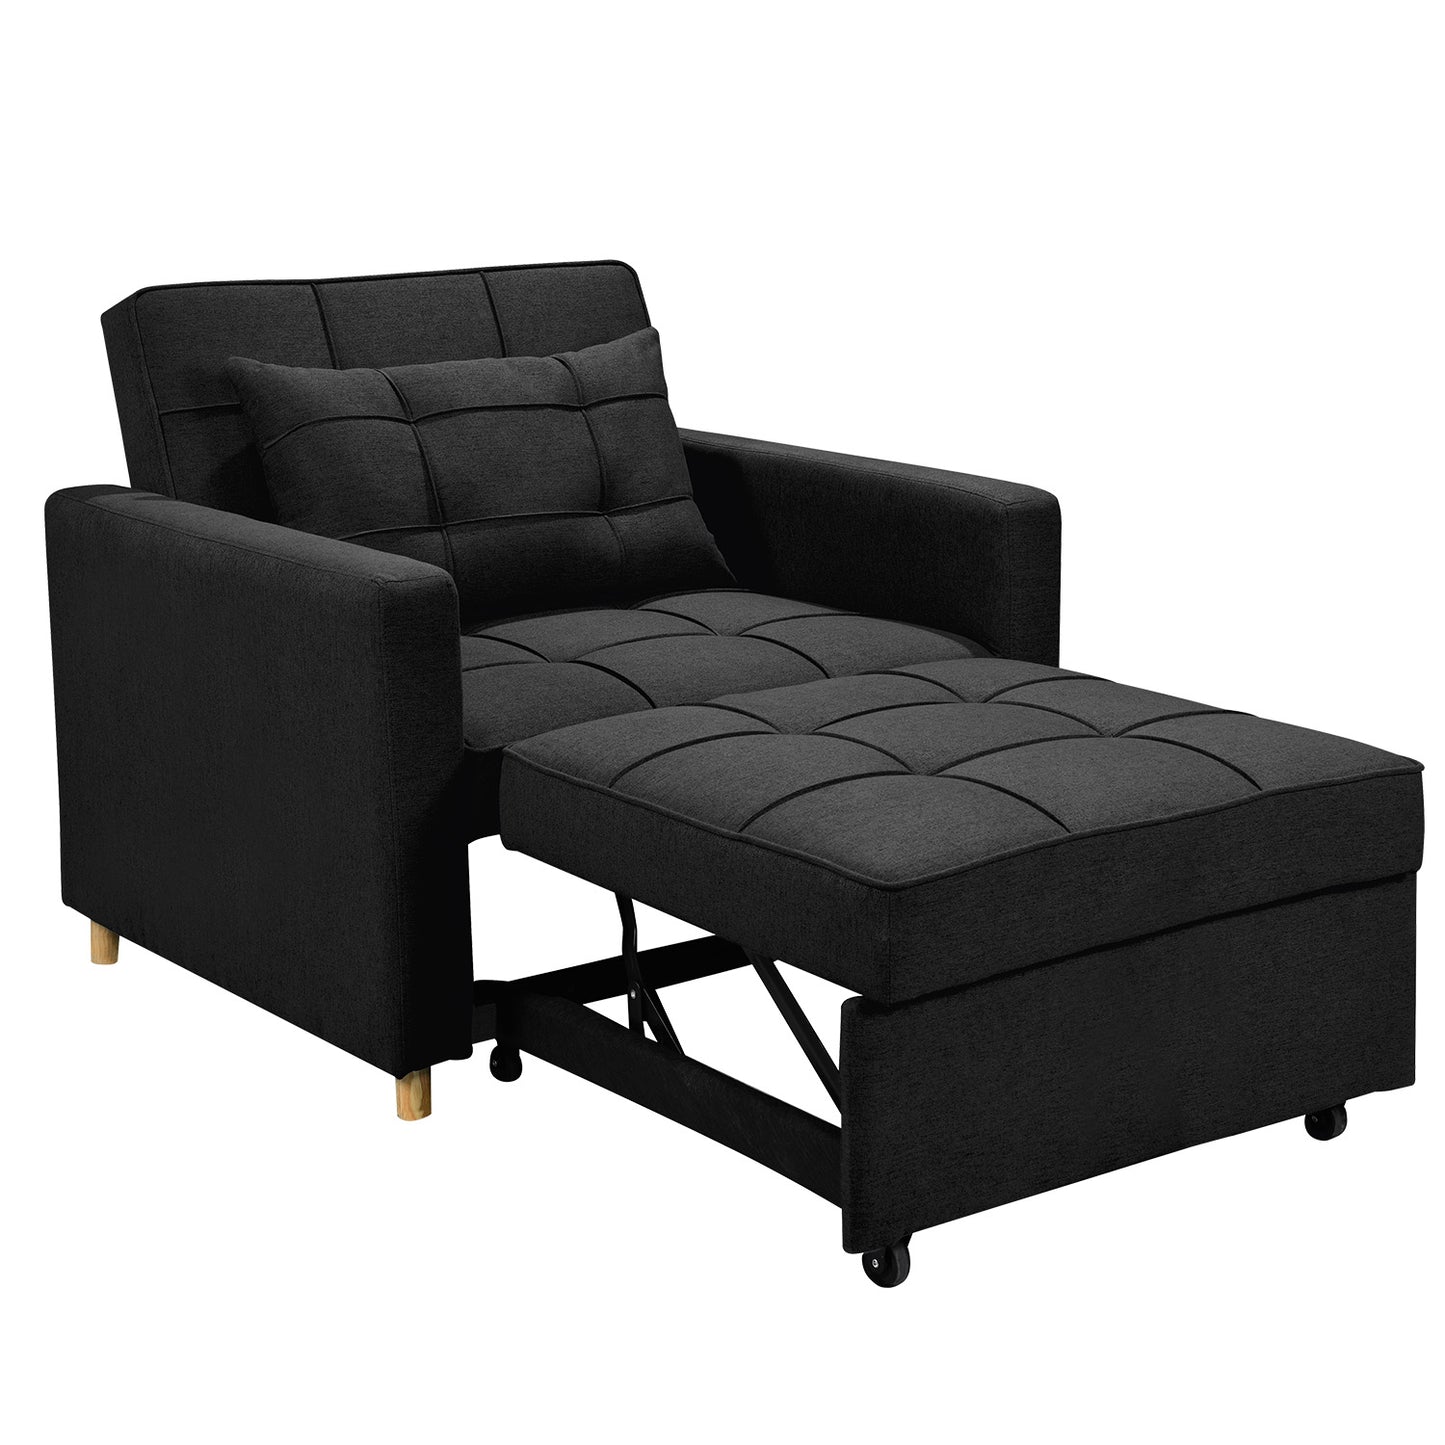 Suri 3-in-1 Convertible Lounge Chair Bed by Sarantino - Black